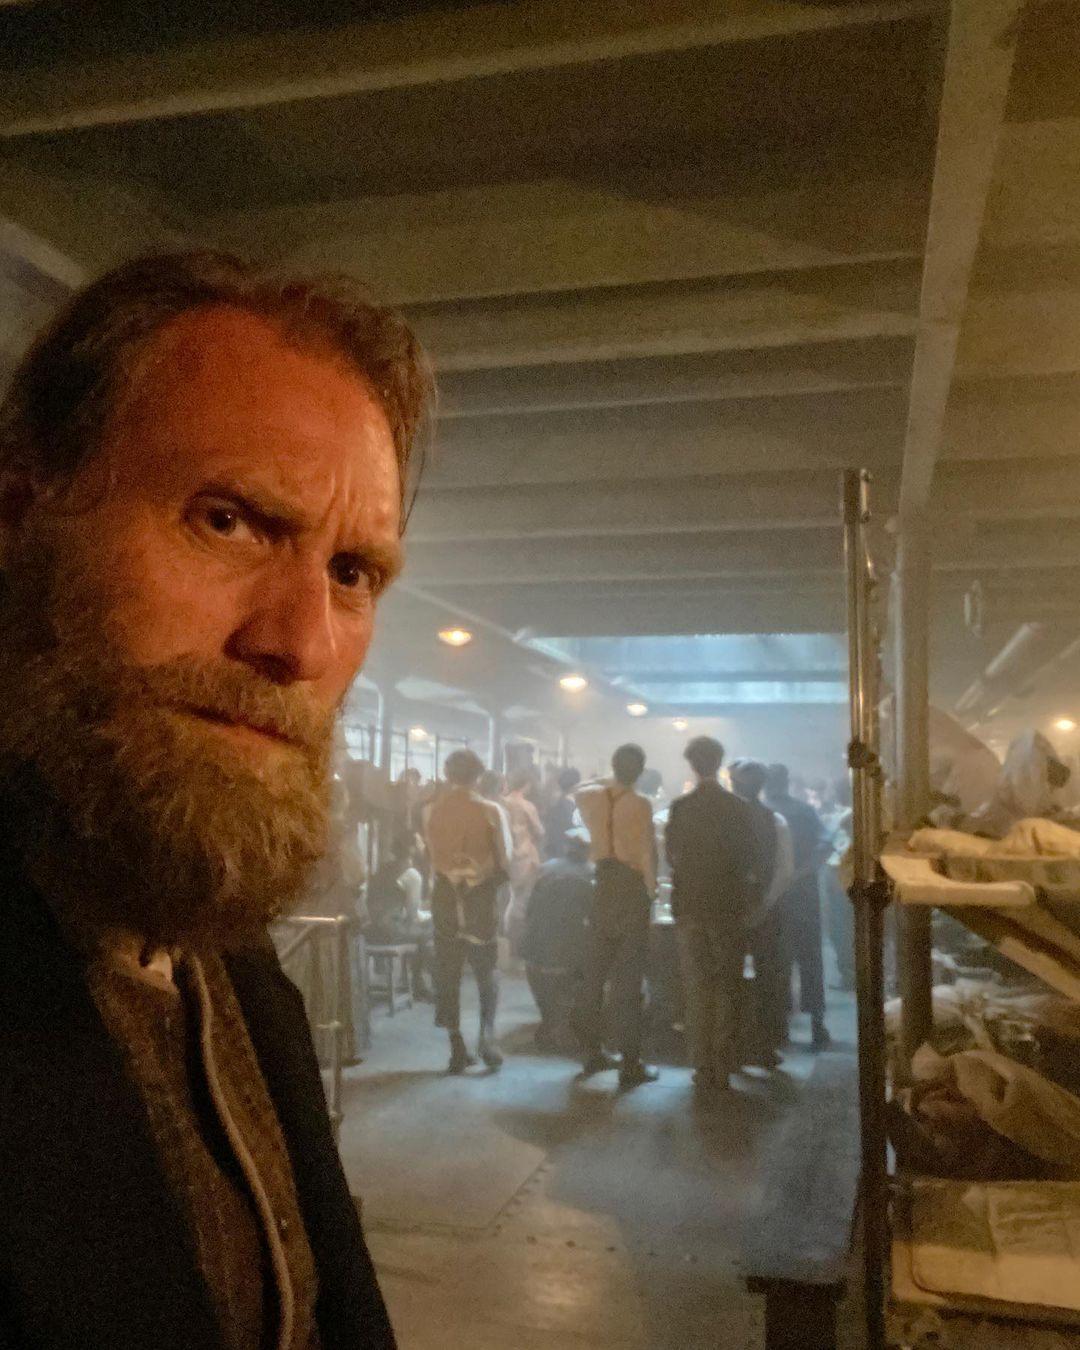 class="content__text"
 Anker is wondering “WTF happened to my kids on this boat… what a shit cruise “😂 #actor #1899 @netflix1899@netflixde #anker #life #follow 
 